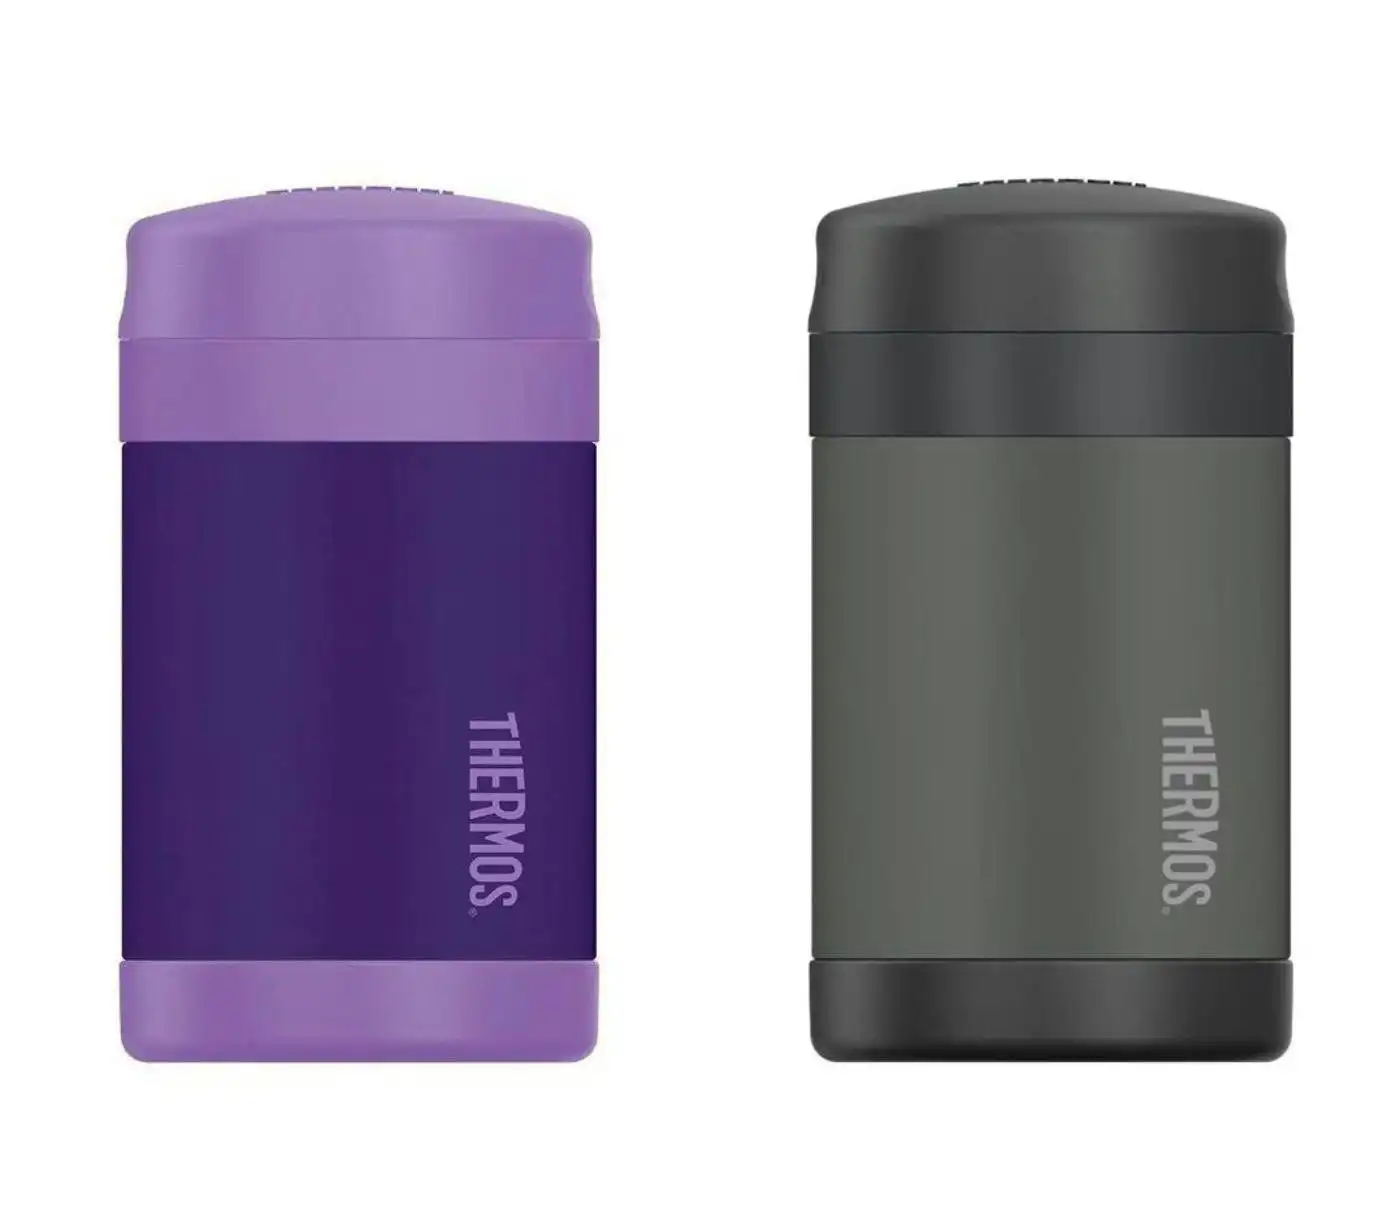 Thermos 470ml STAINLESS STEEL FOOD JAR WITH SPOON - PURPLE OR CHARCOAL